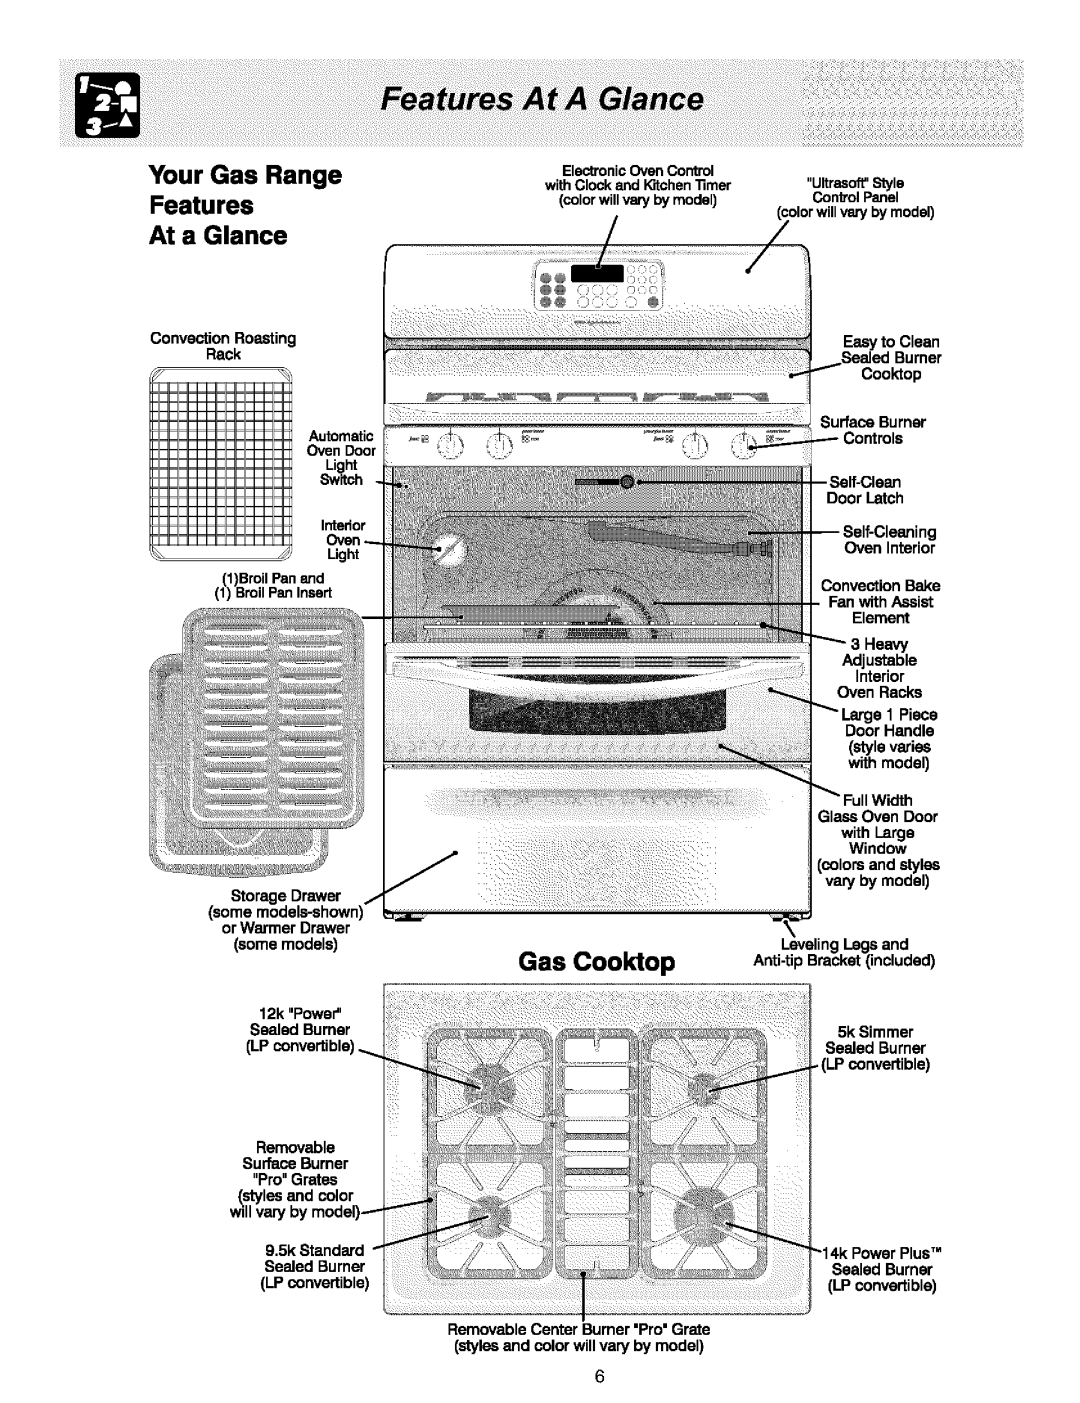 Frigidaire ES400 manual Your Gas Range Features At a Glance, Gas Cooktop, StorageDrawer some, Removable SurfaceBurner 